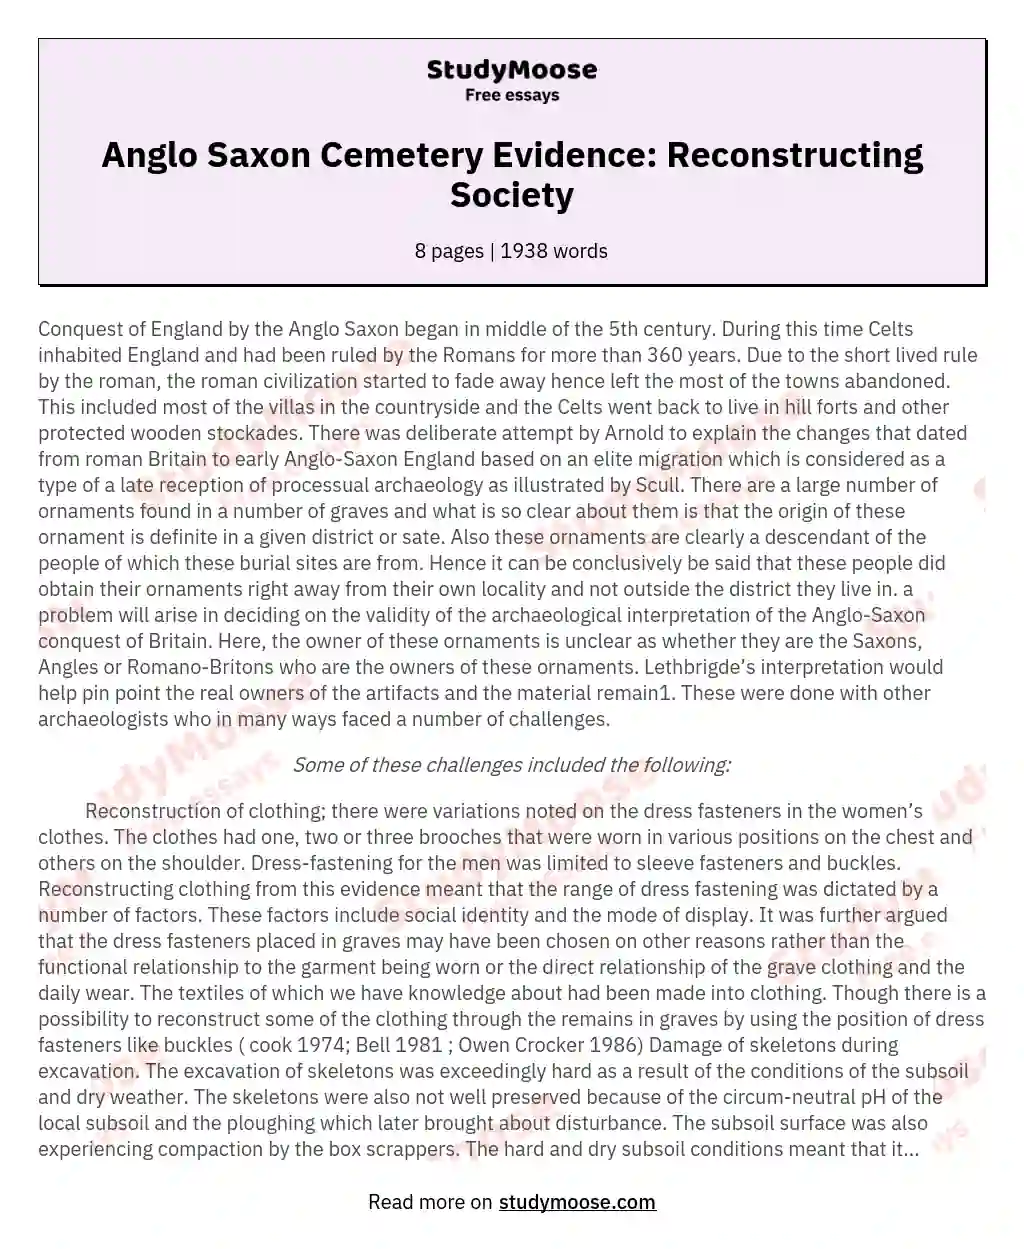 Anglo Saxon Cemetery Evidence: Reconstructing Society essay